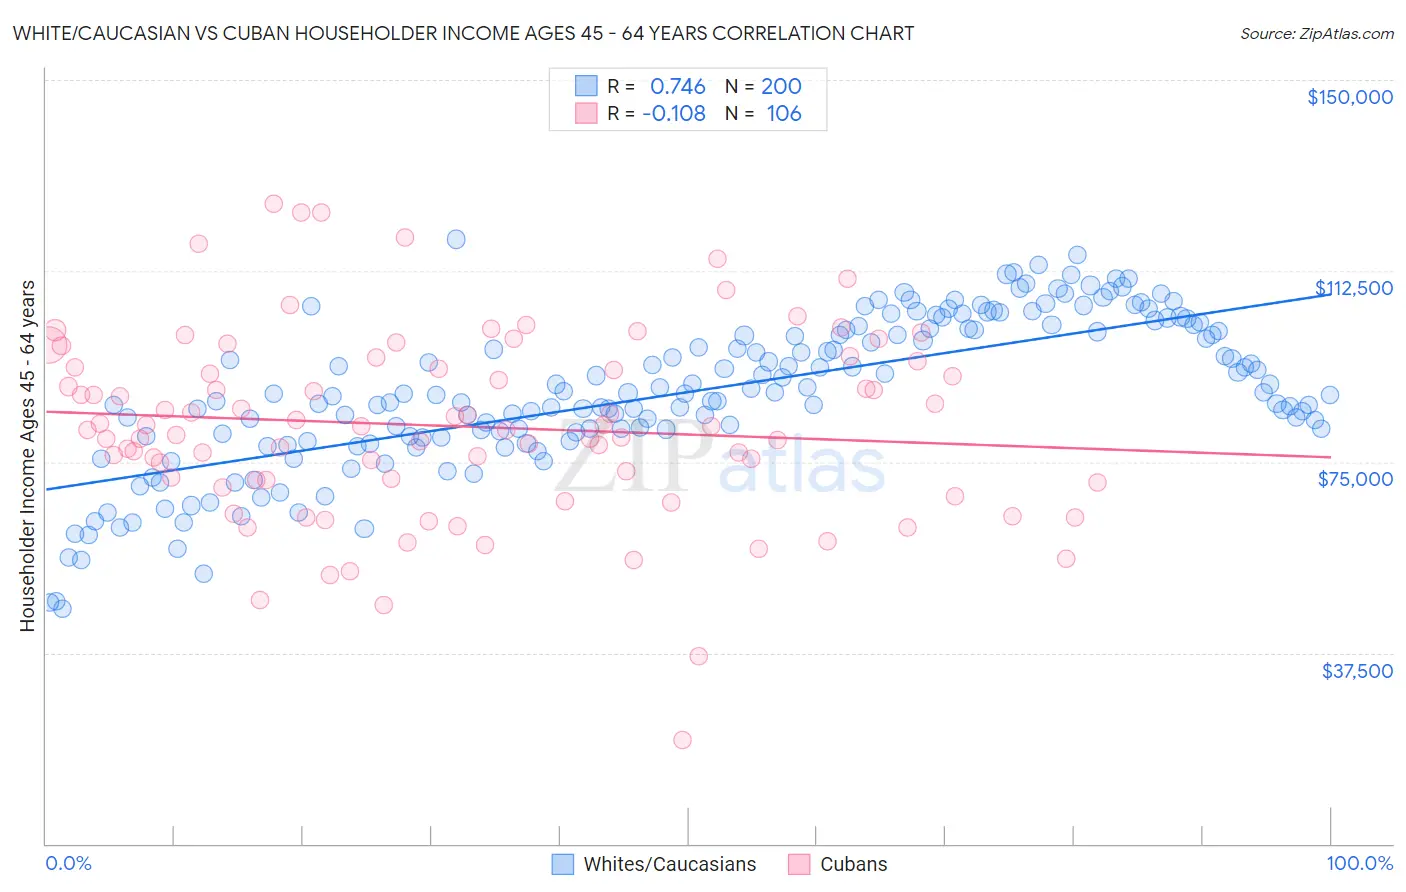 White/Caucasian vs Cuban Householder Income Ages 45 - 64 years